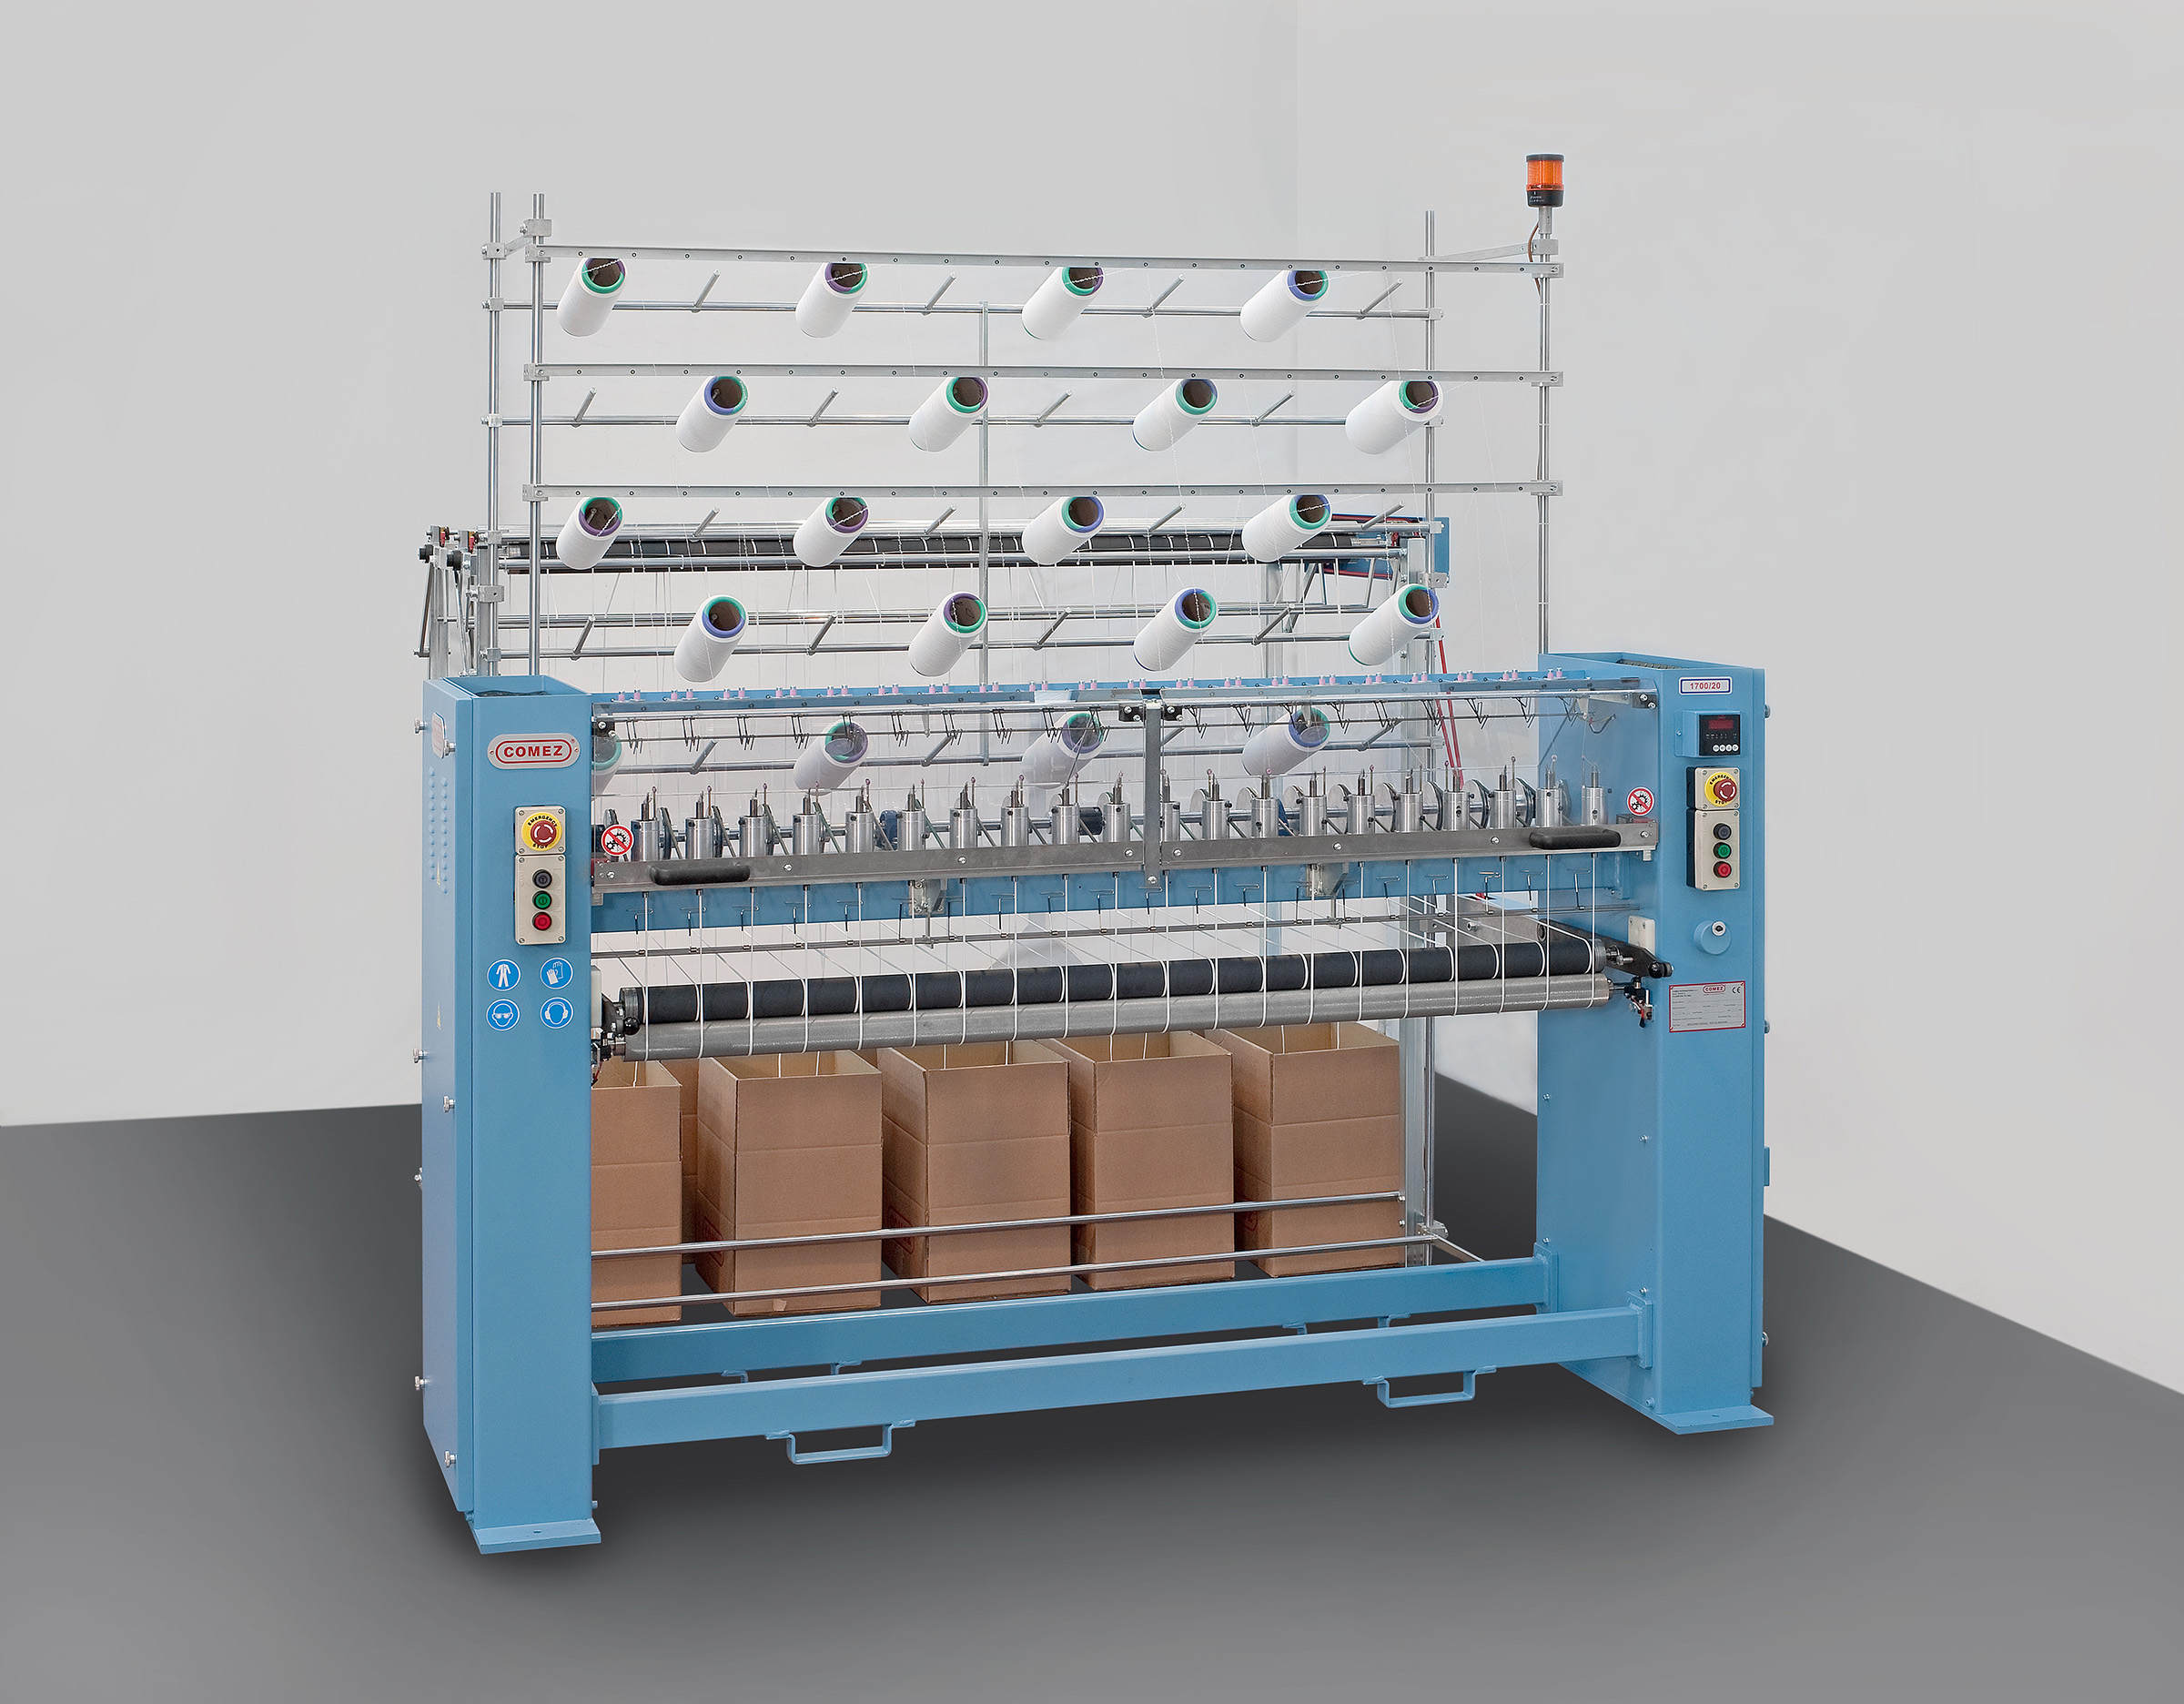 Crochet knitting machine - DECORTRONIC 1000/EL - COMEZ - flat /  fully-automatic / industrial